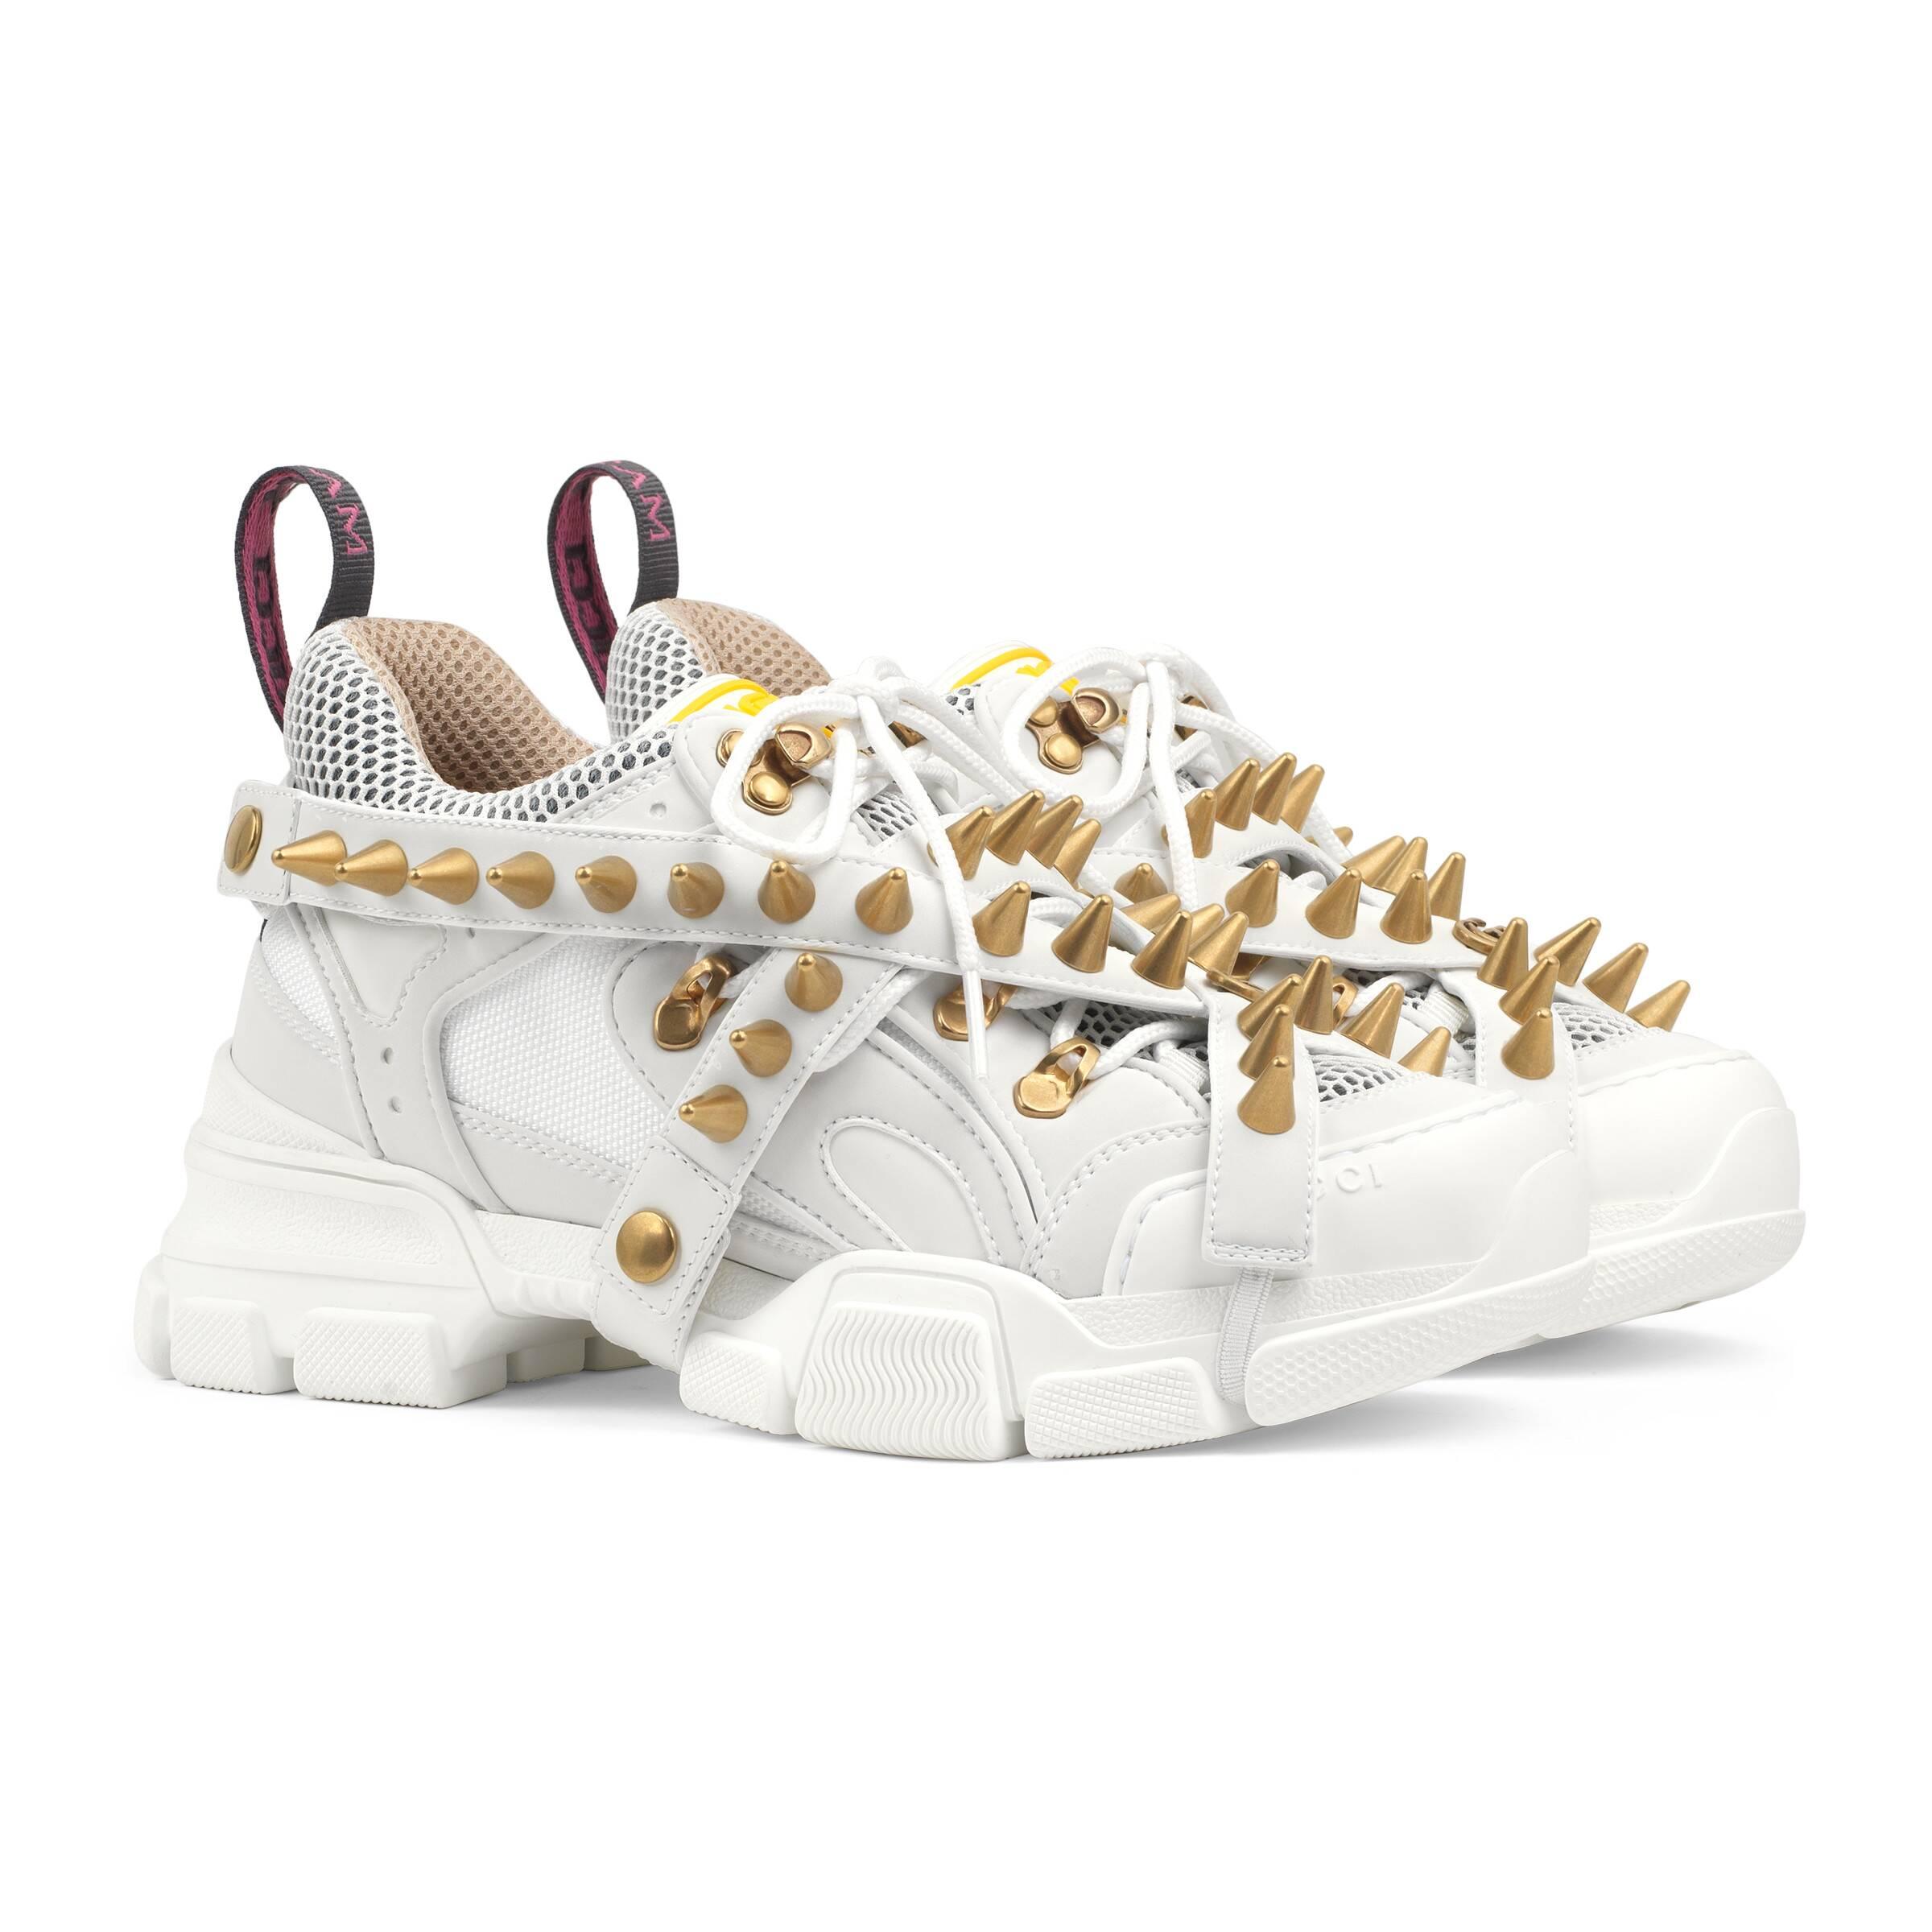 Gucci Rubber Flashtrek Sneakers in White - Lyst